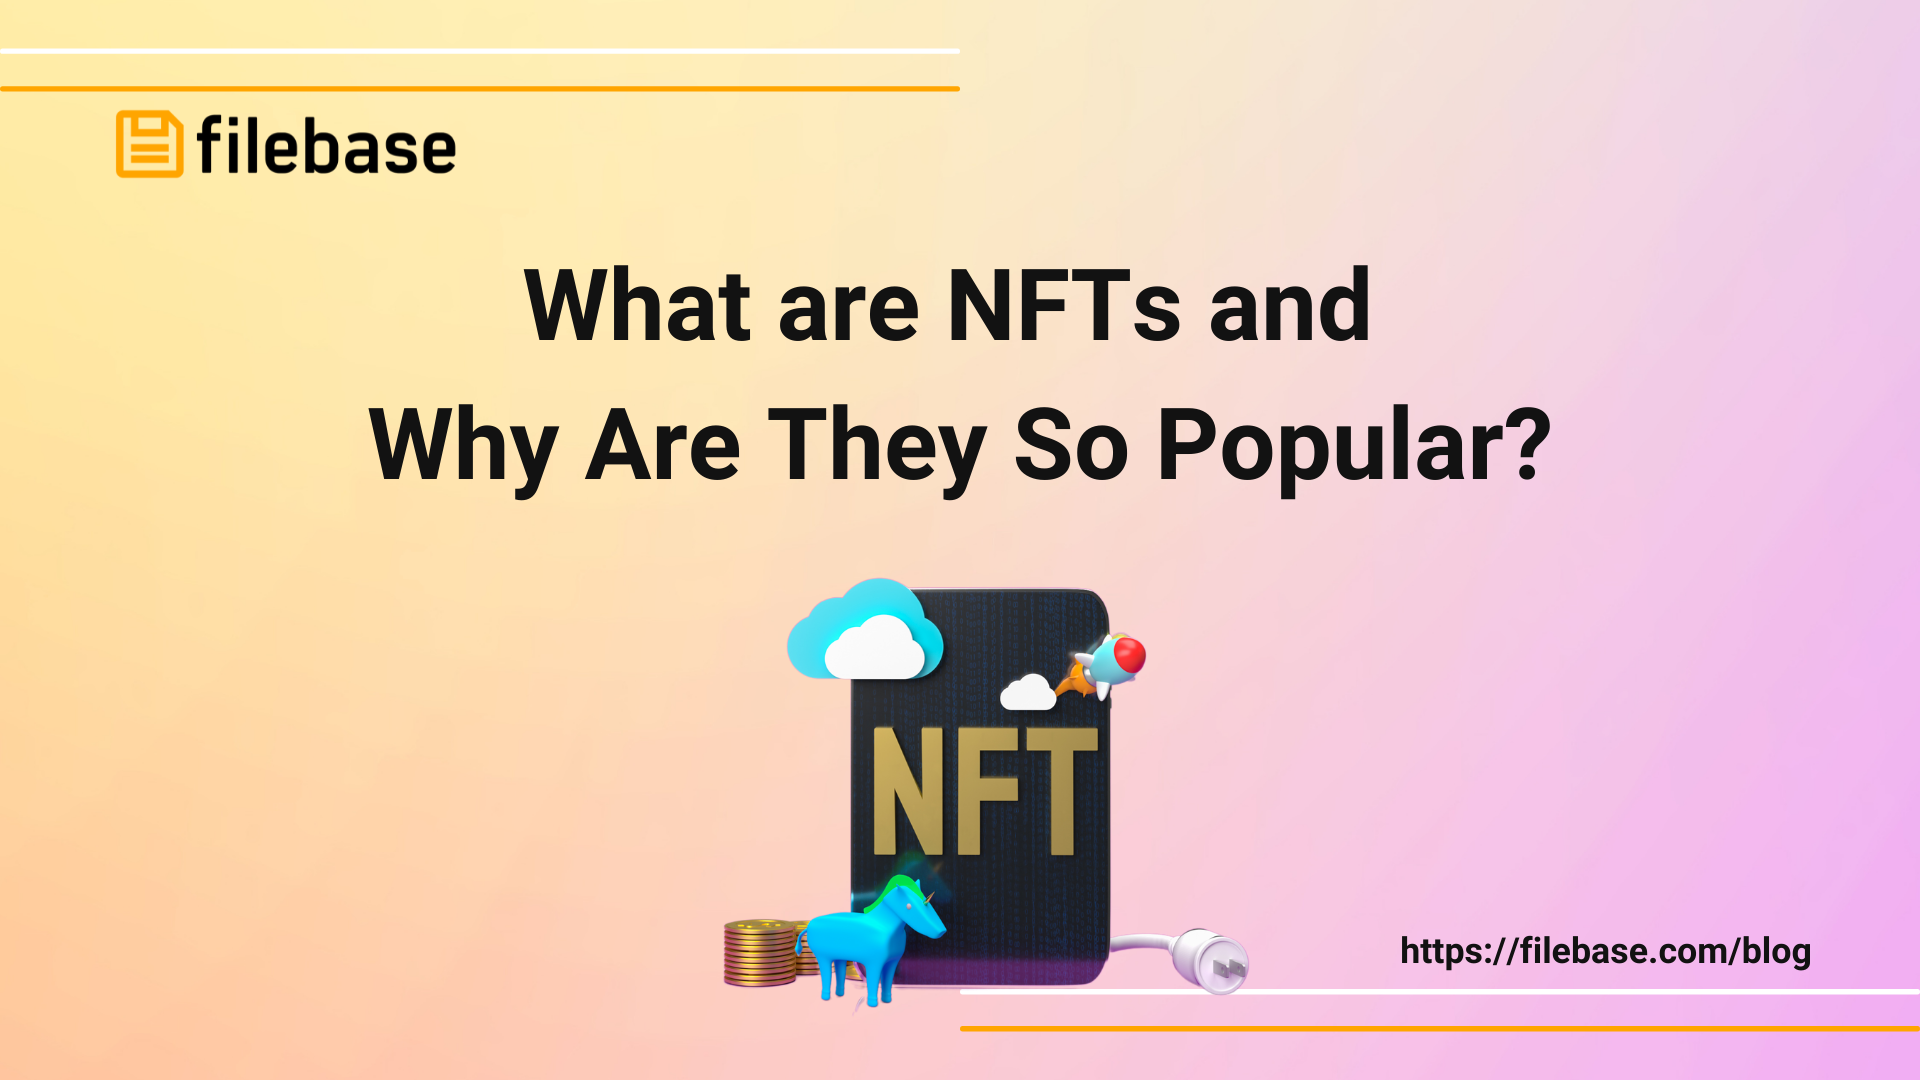 What are NFTs and Why Are They So Popular?